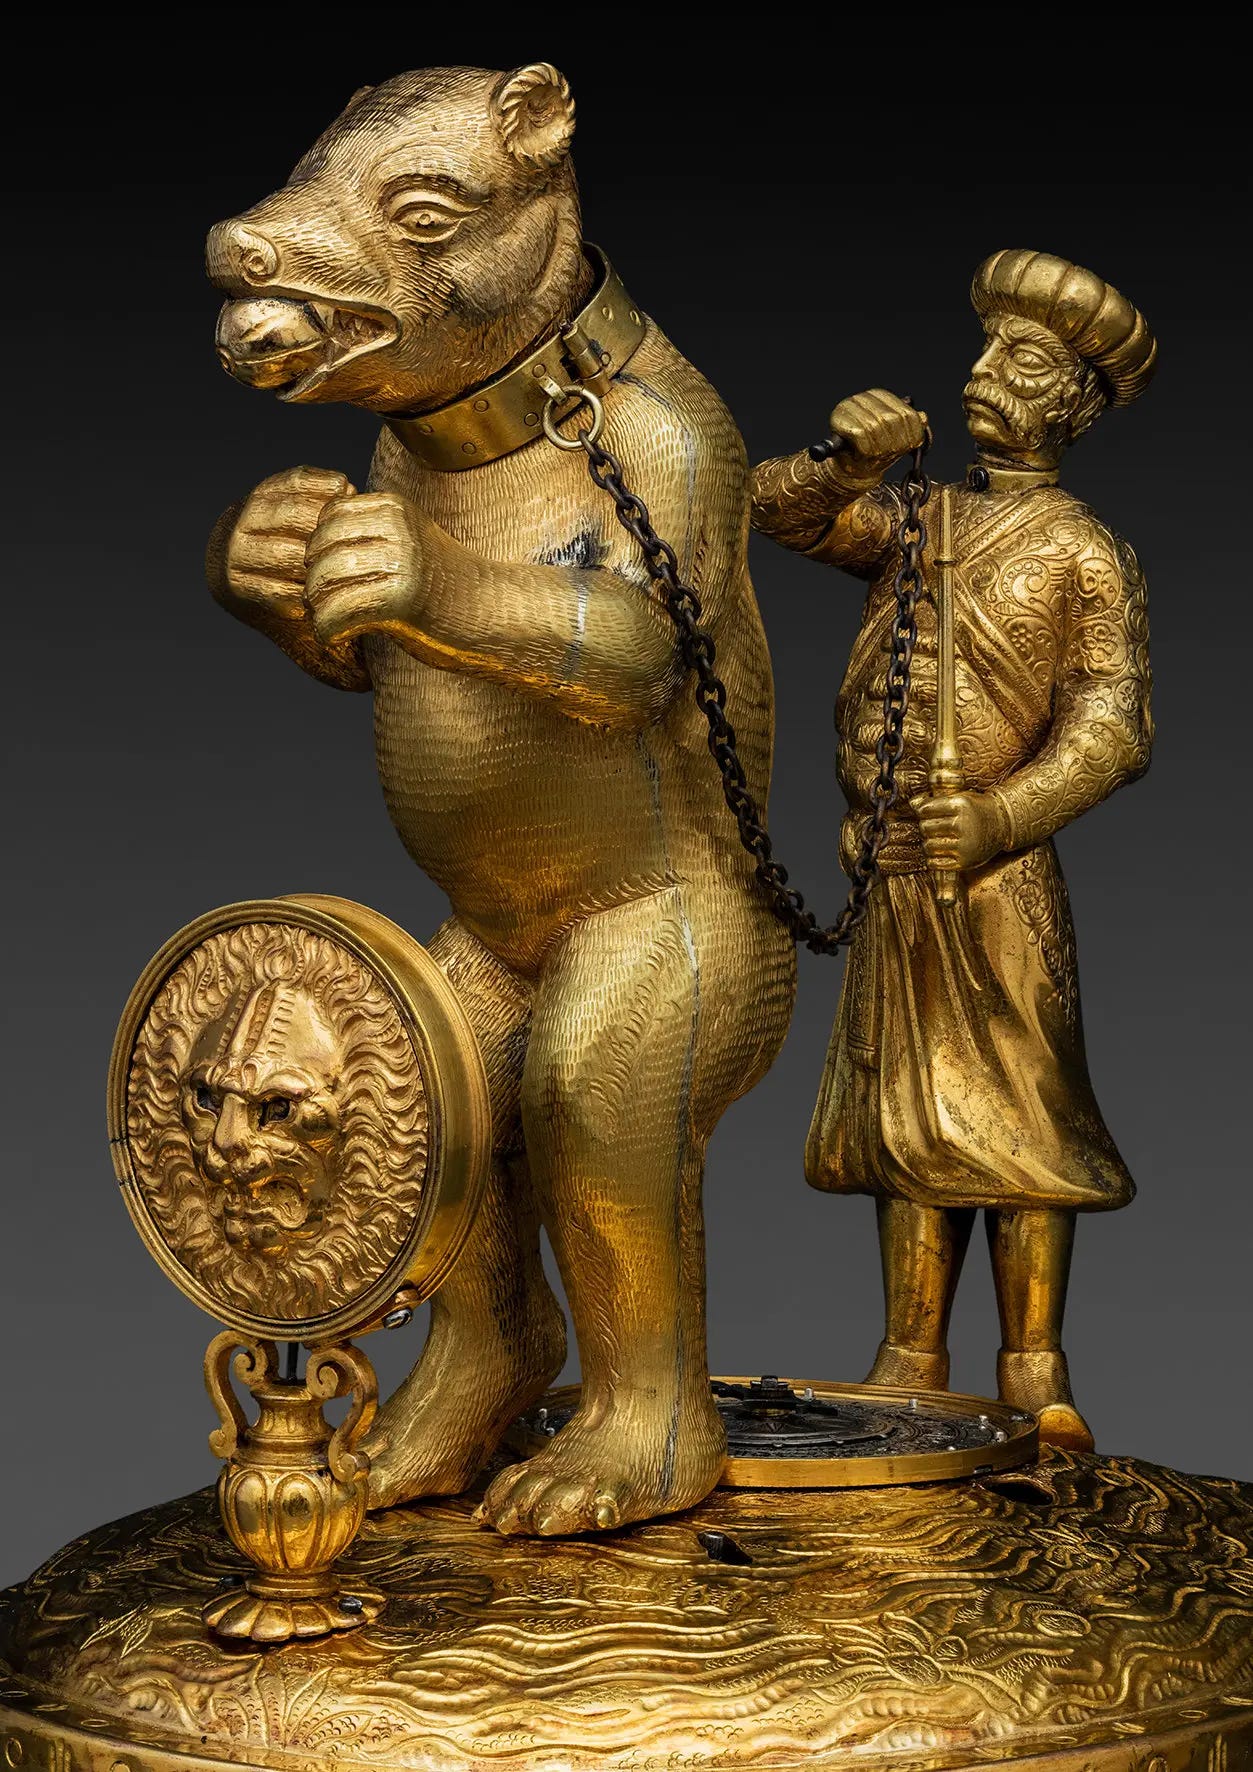 Bronze figures. A standing bear has a collar and chain and is being controlled by an opulently dressed man